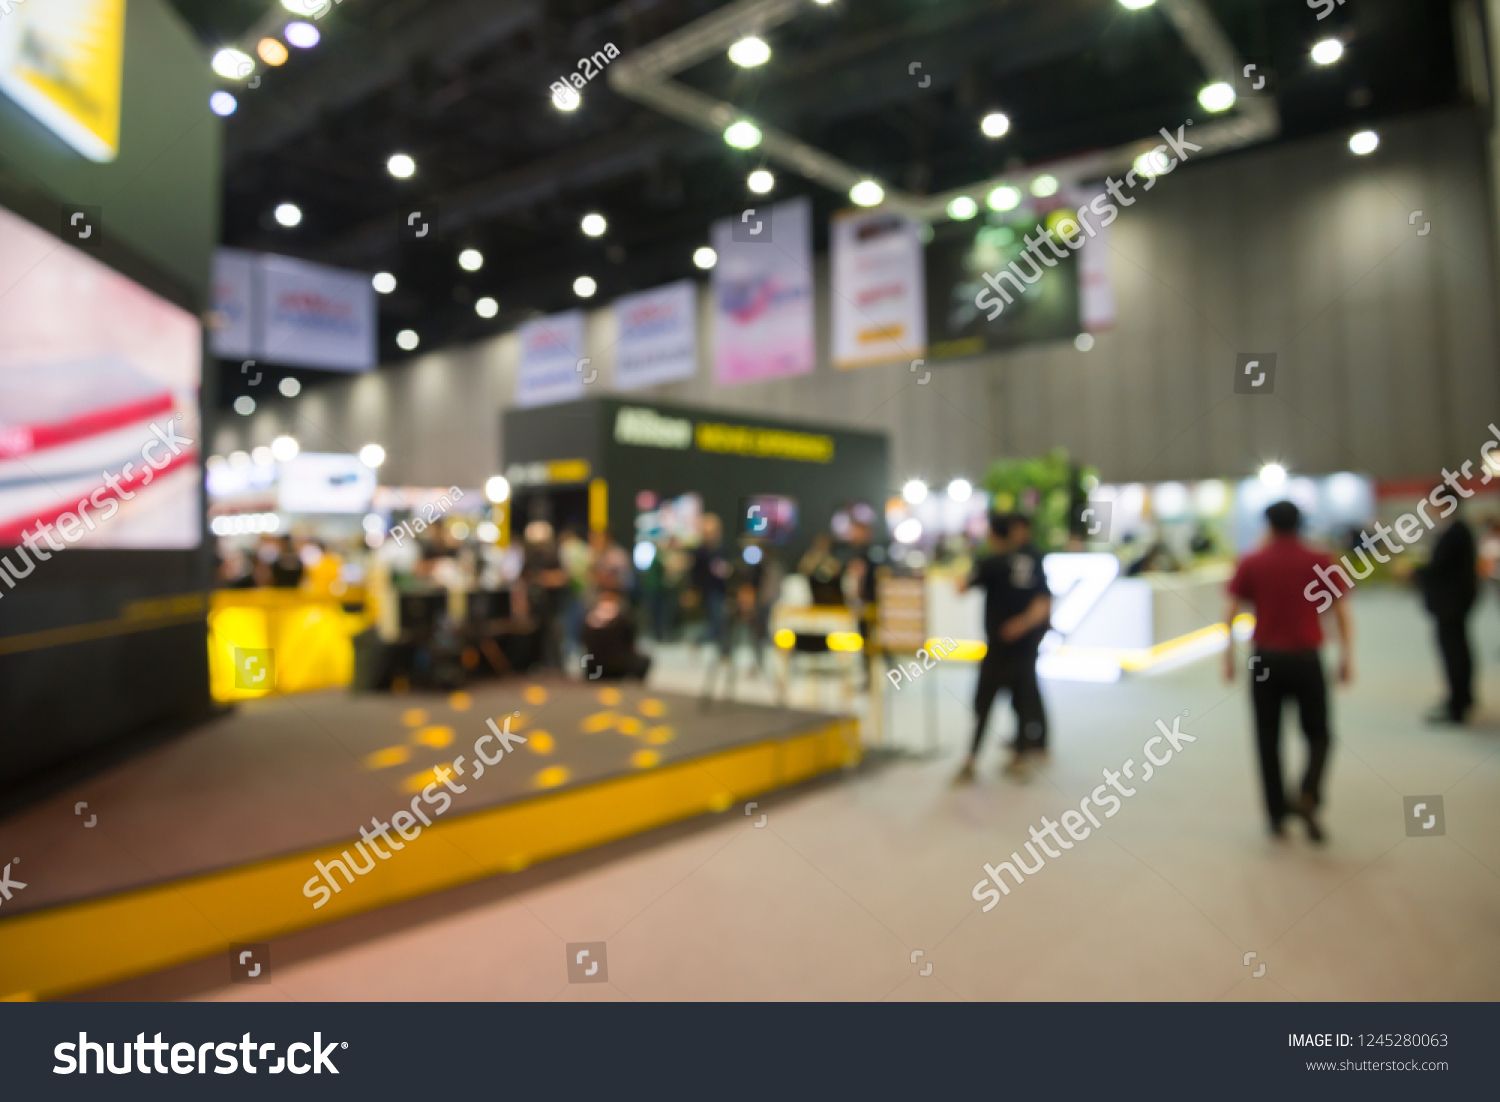 Blur Background Of People In Photo Camera Fair Expo At Big